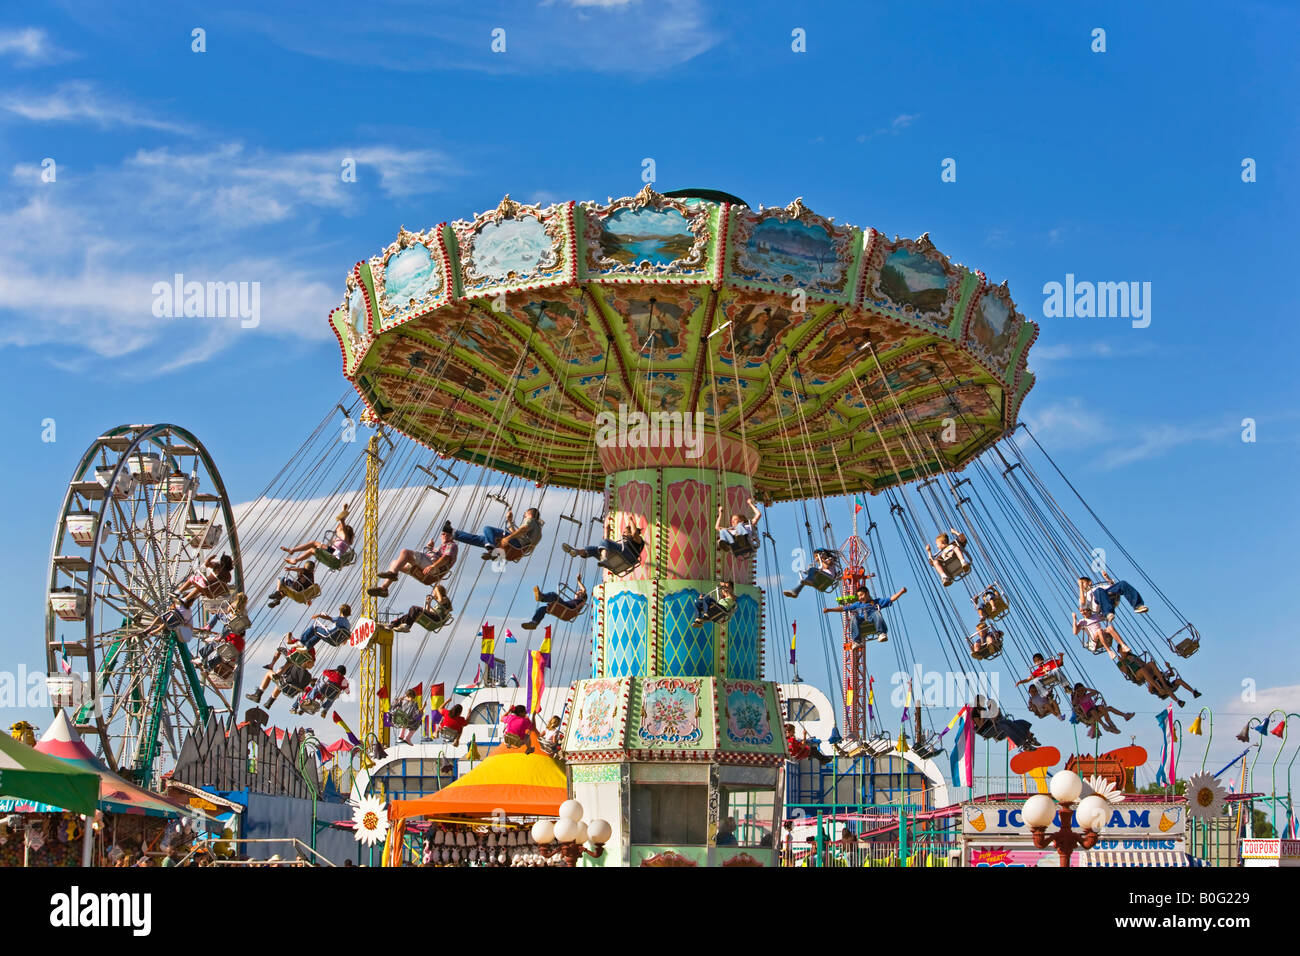 Carnival Swing Ride High Resolution Stock Photography and Images - Alamy